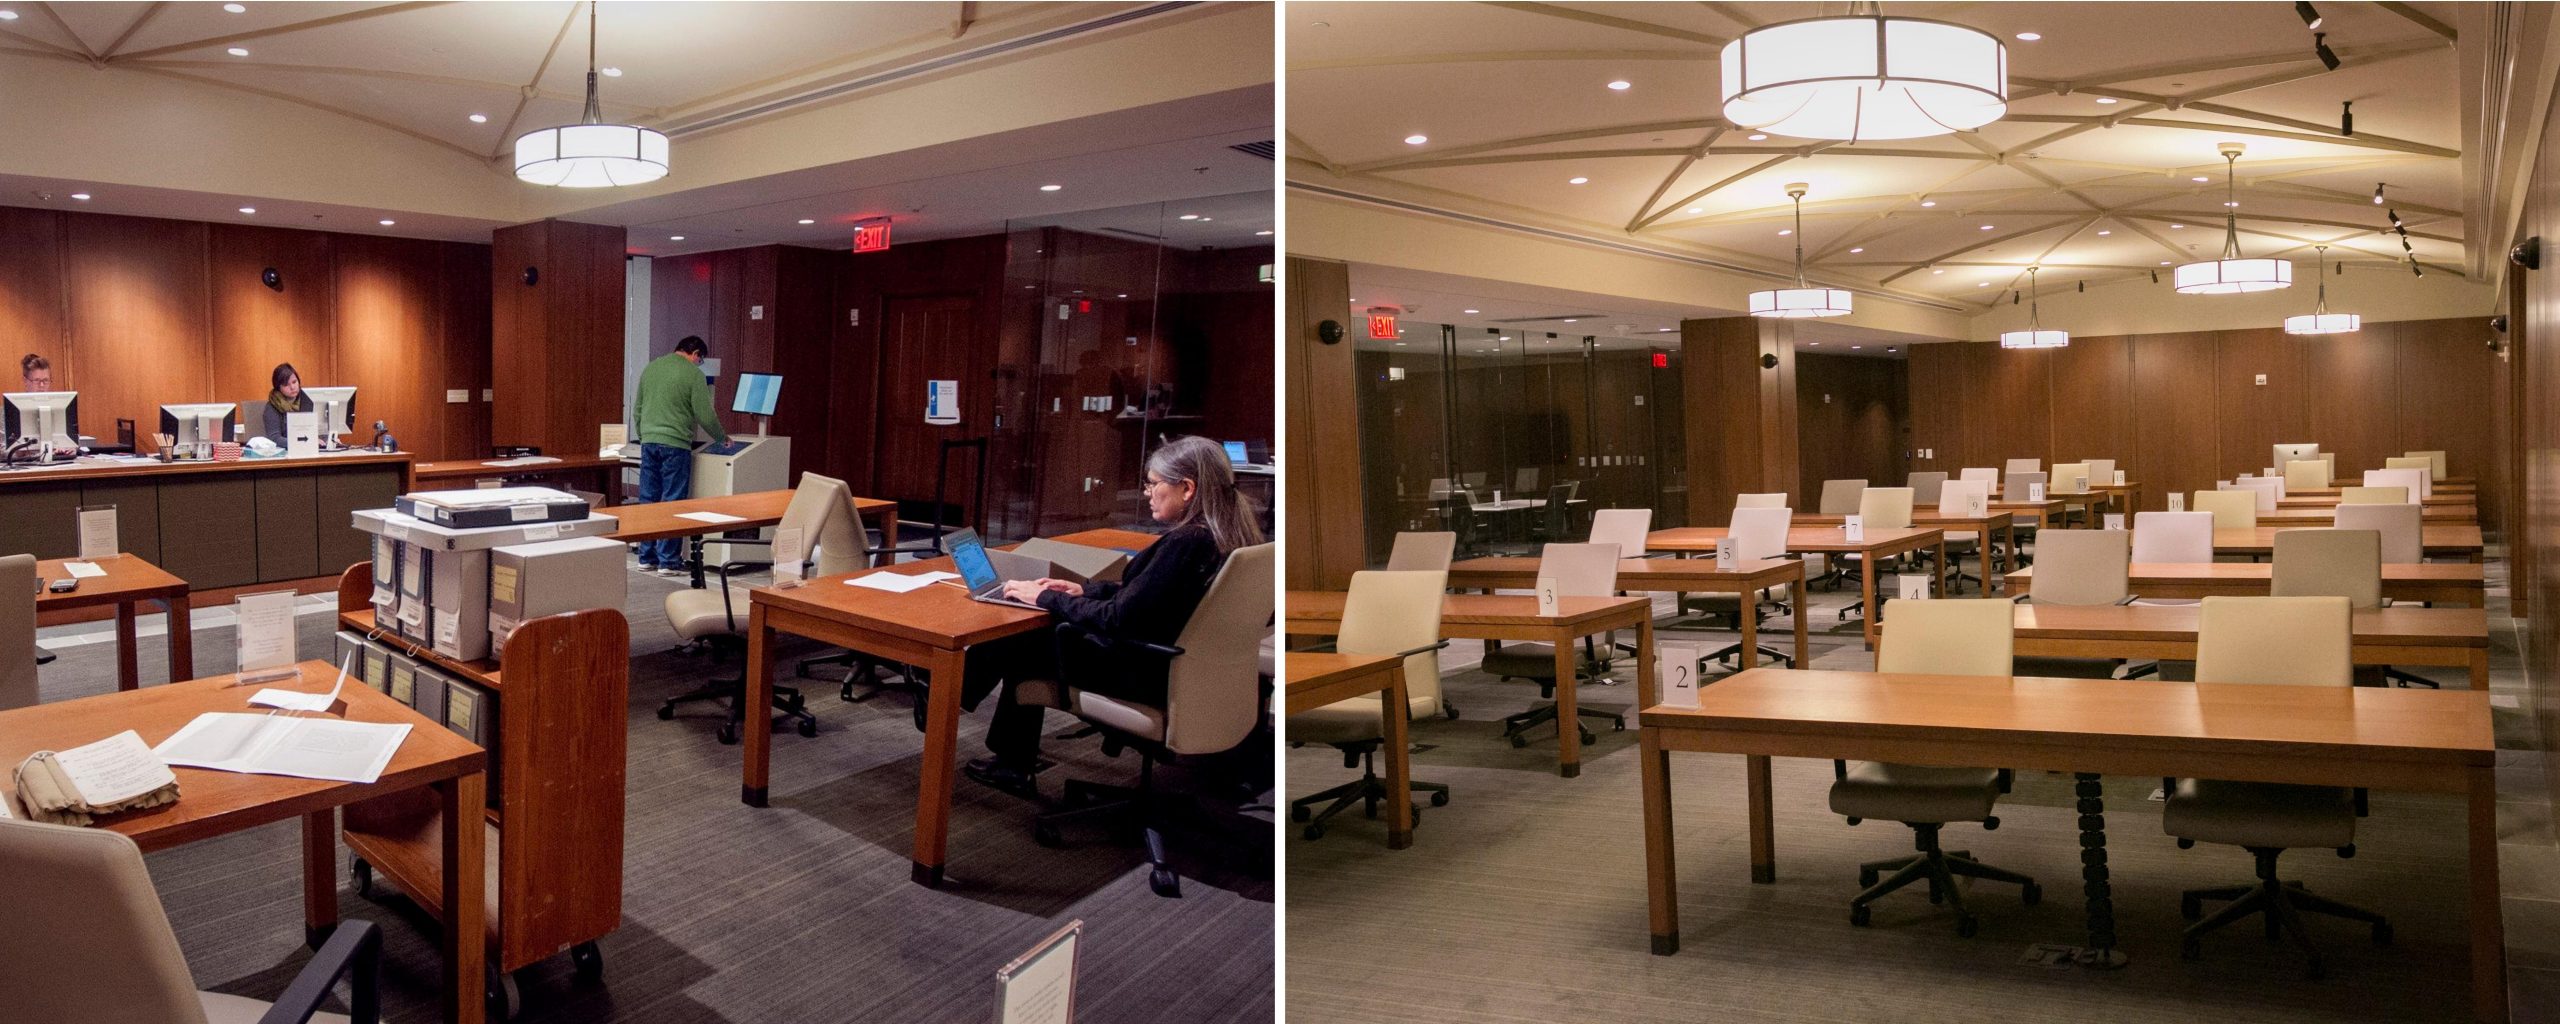 Rubenstein Reading Room before and after